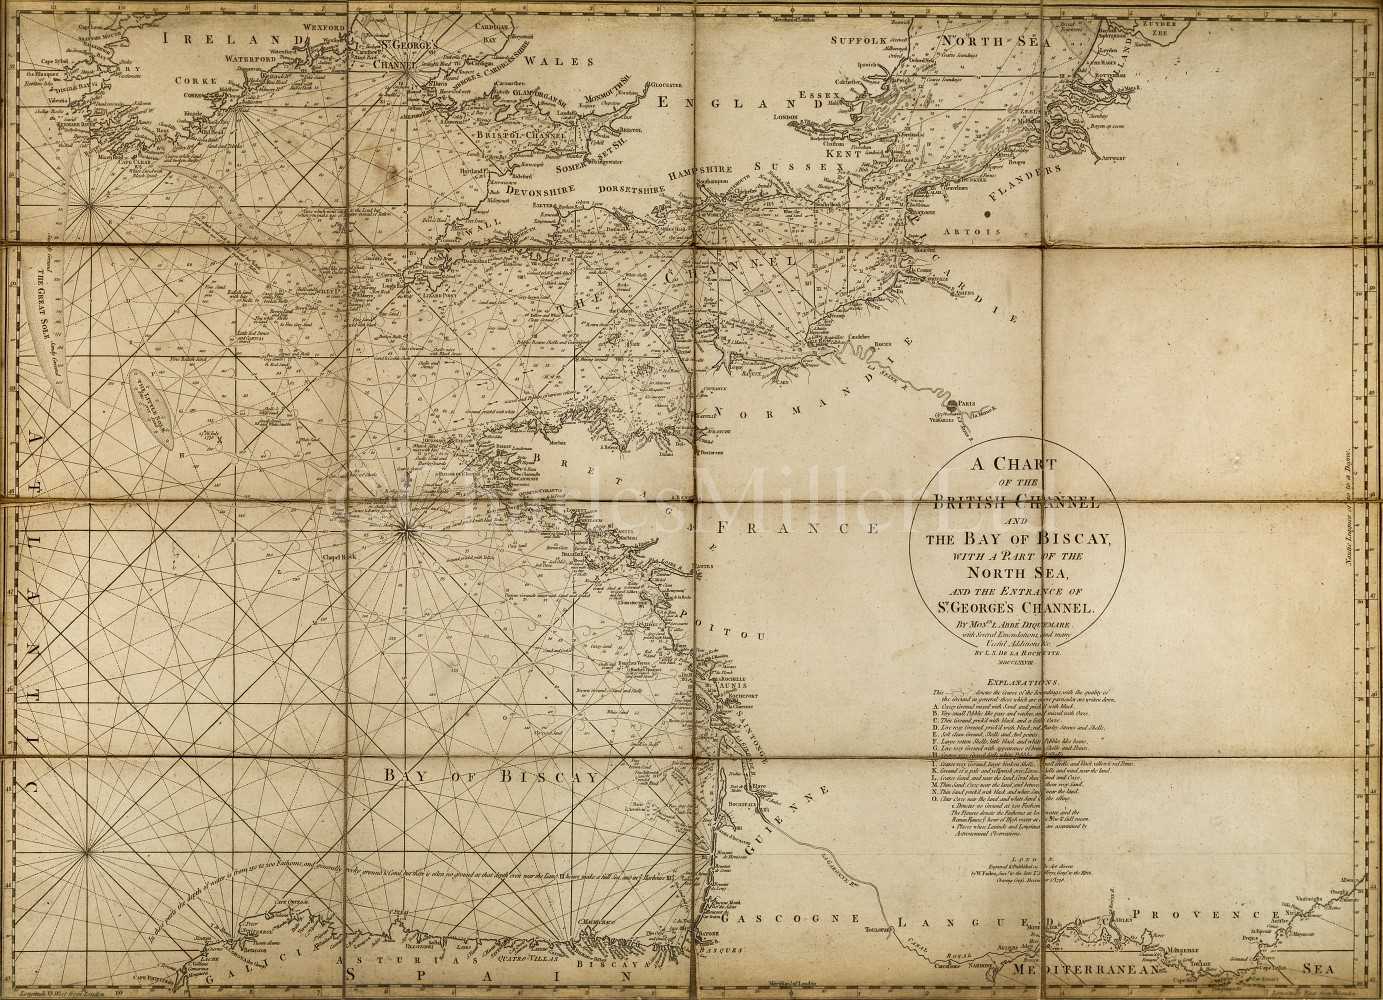 Lot 21 - 'A CHART OF THE BRITISH CHANNEL AND THE BAY OF BISCAY...'